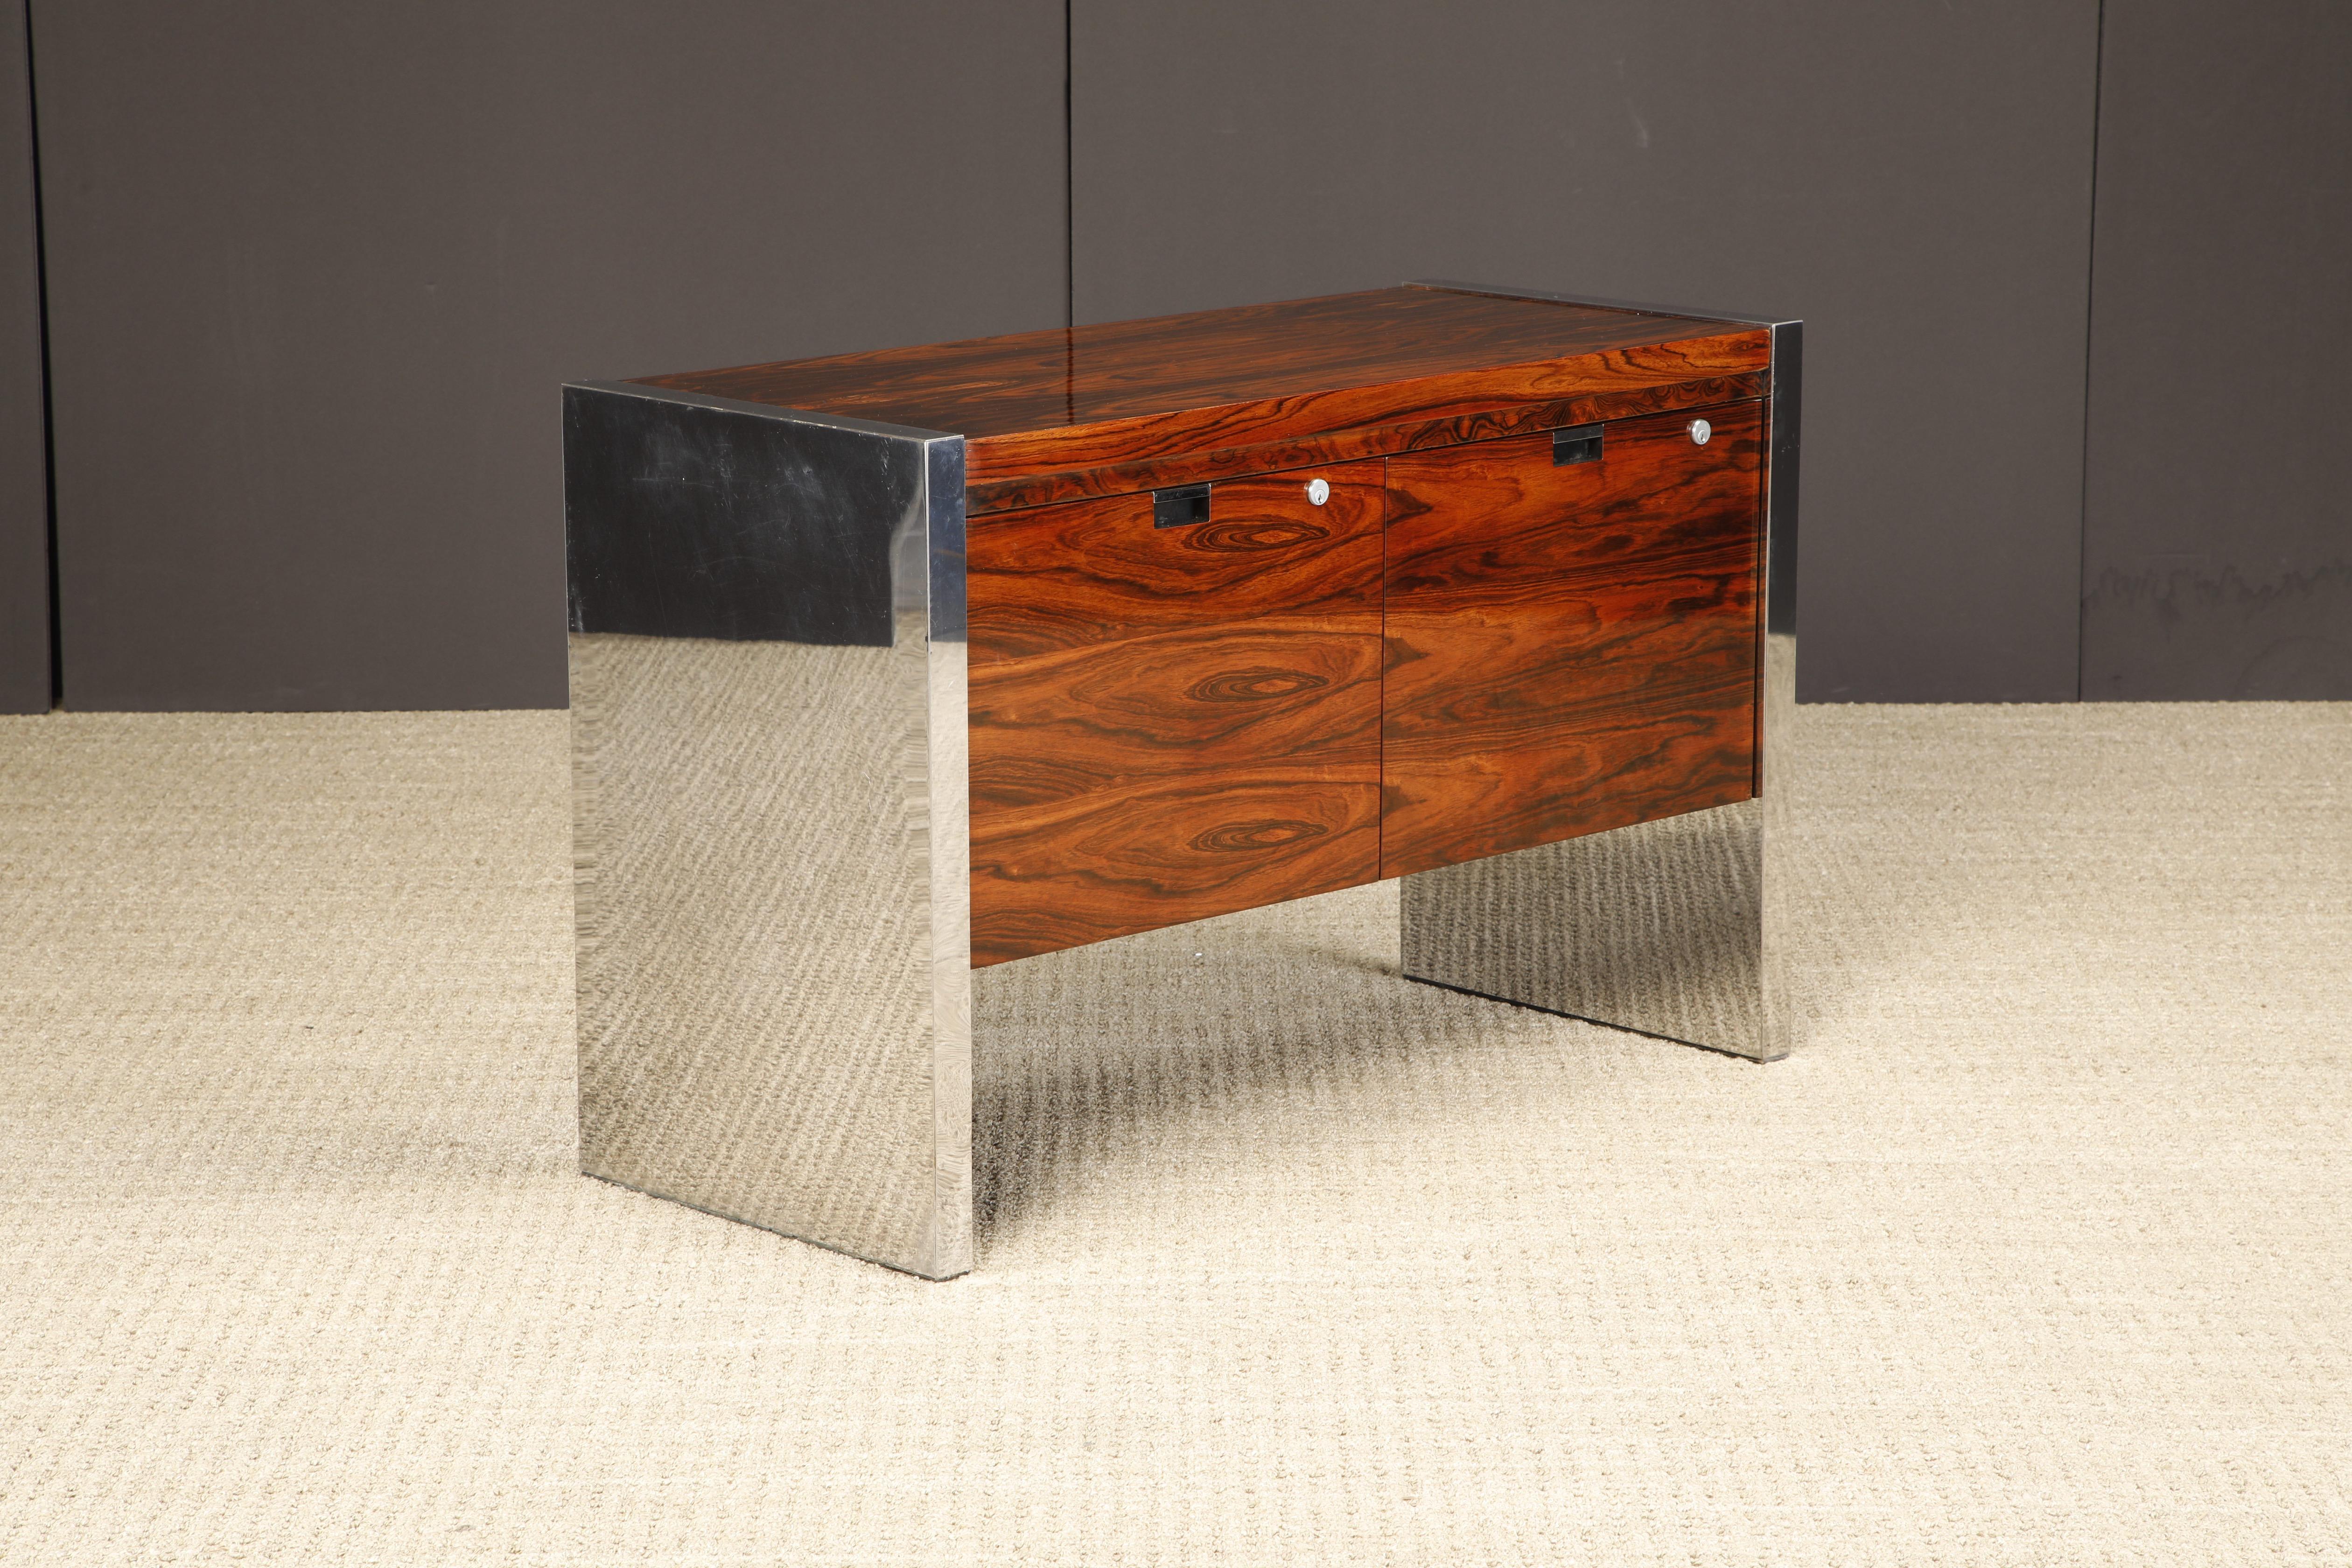 Mid-Century Modern Rosewood and Chrome Credenza by Roger Sprunger for Dunbar, c 1970, Signed